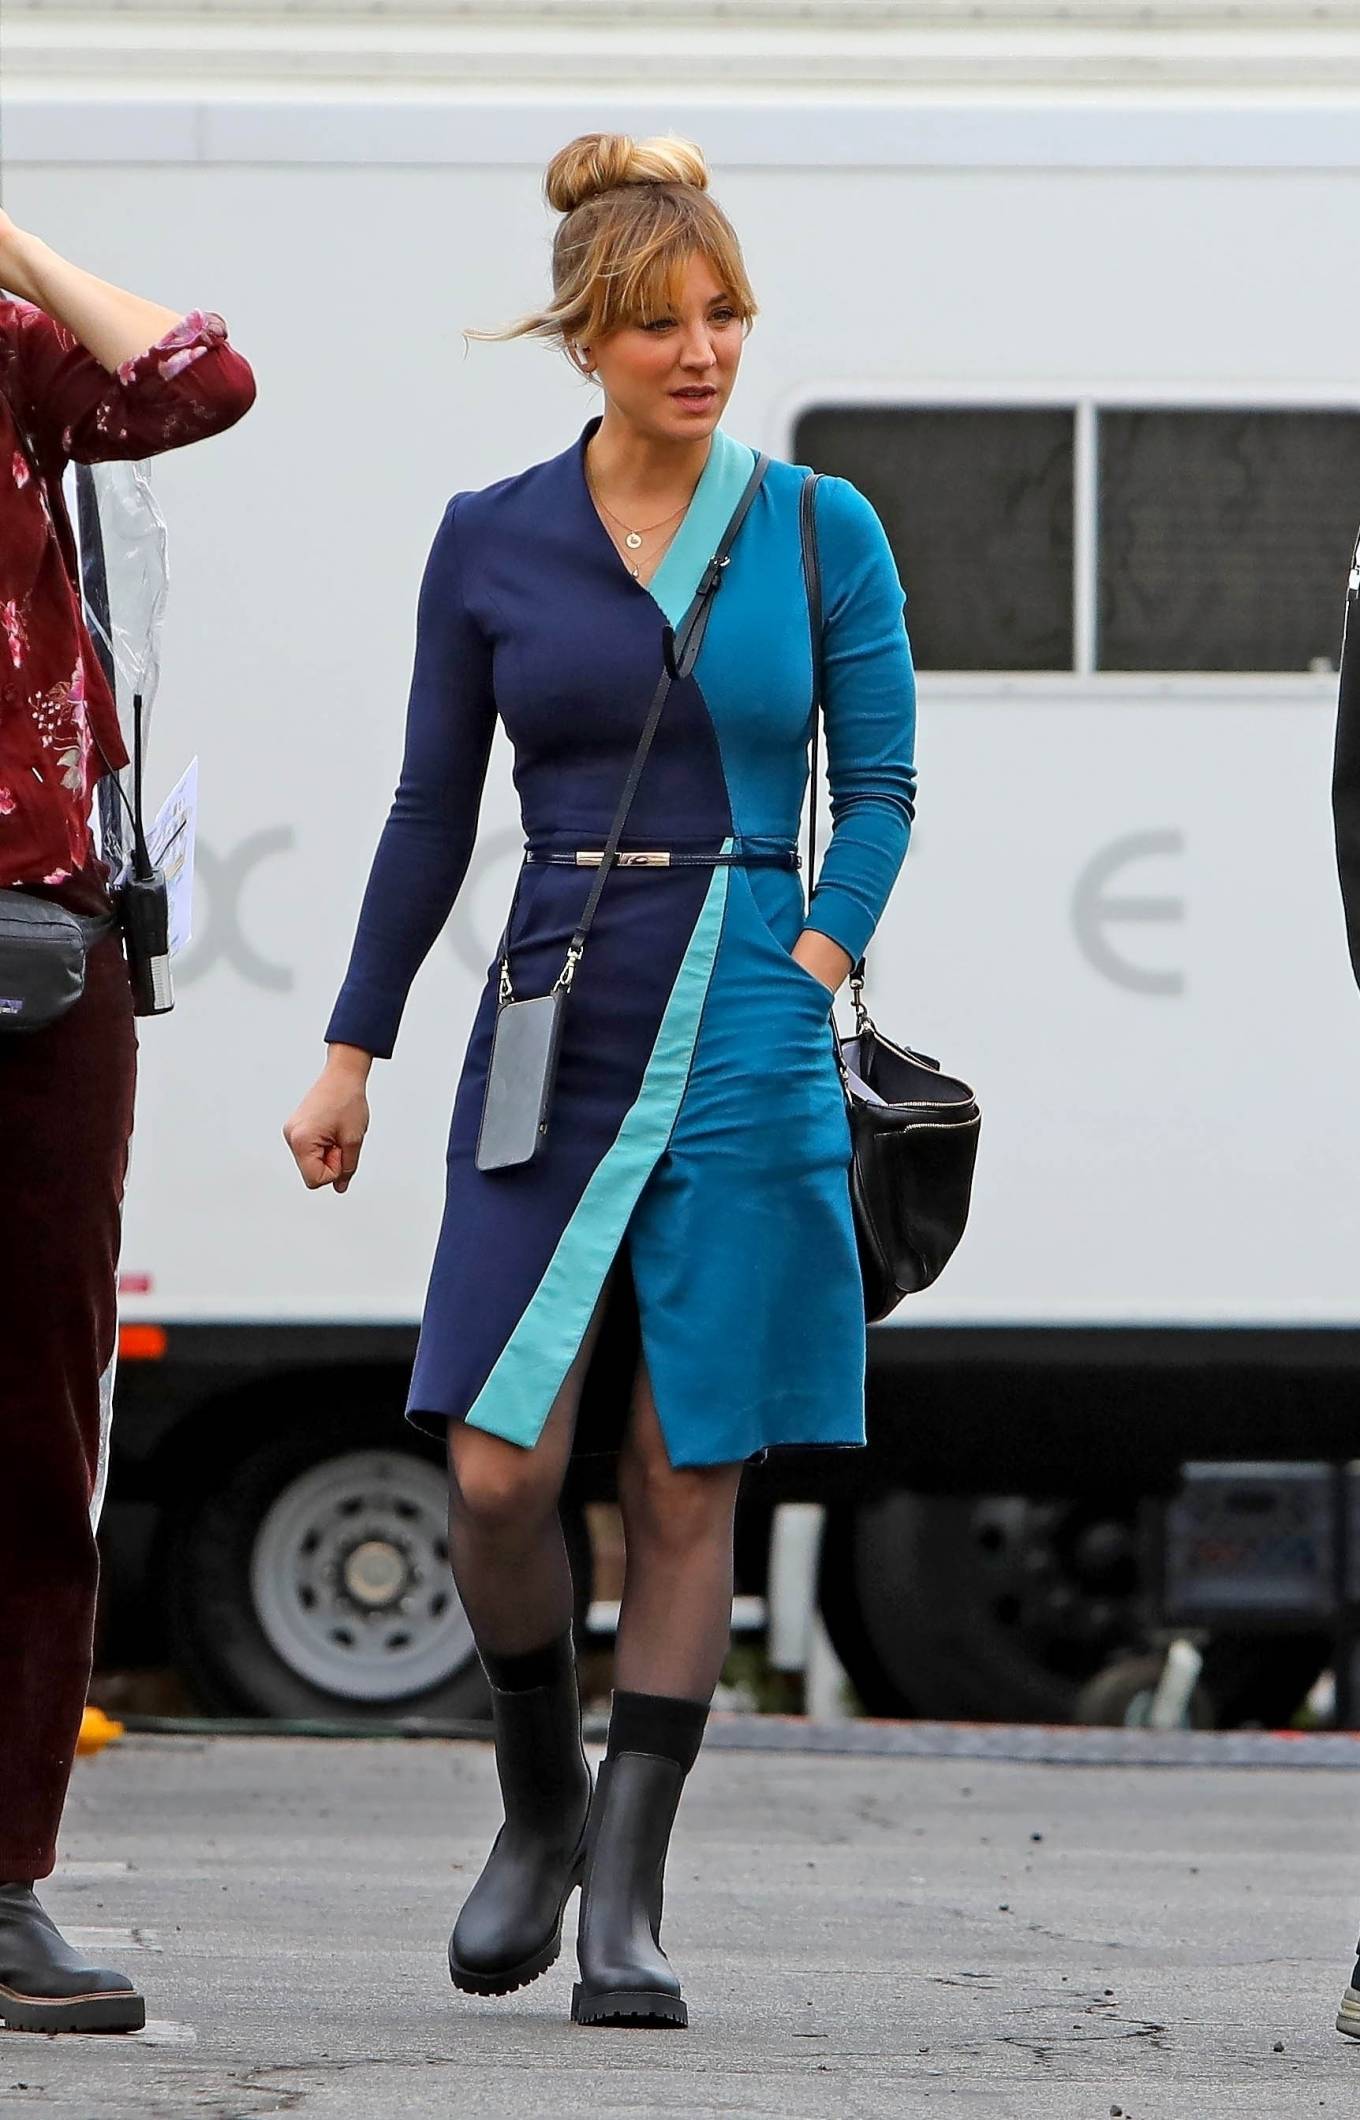 Kaley Cuoco 2021 : Kaley Cuoco – On a break from shooting scenes on the set of The Flight Attendant in Los Angeles-20